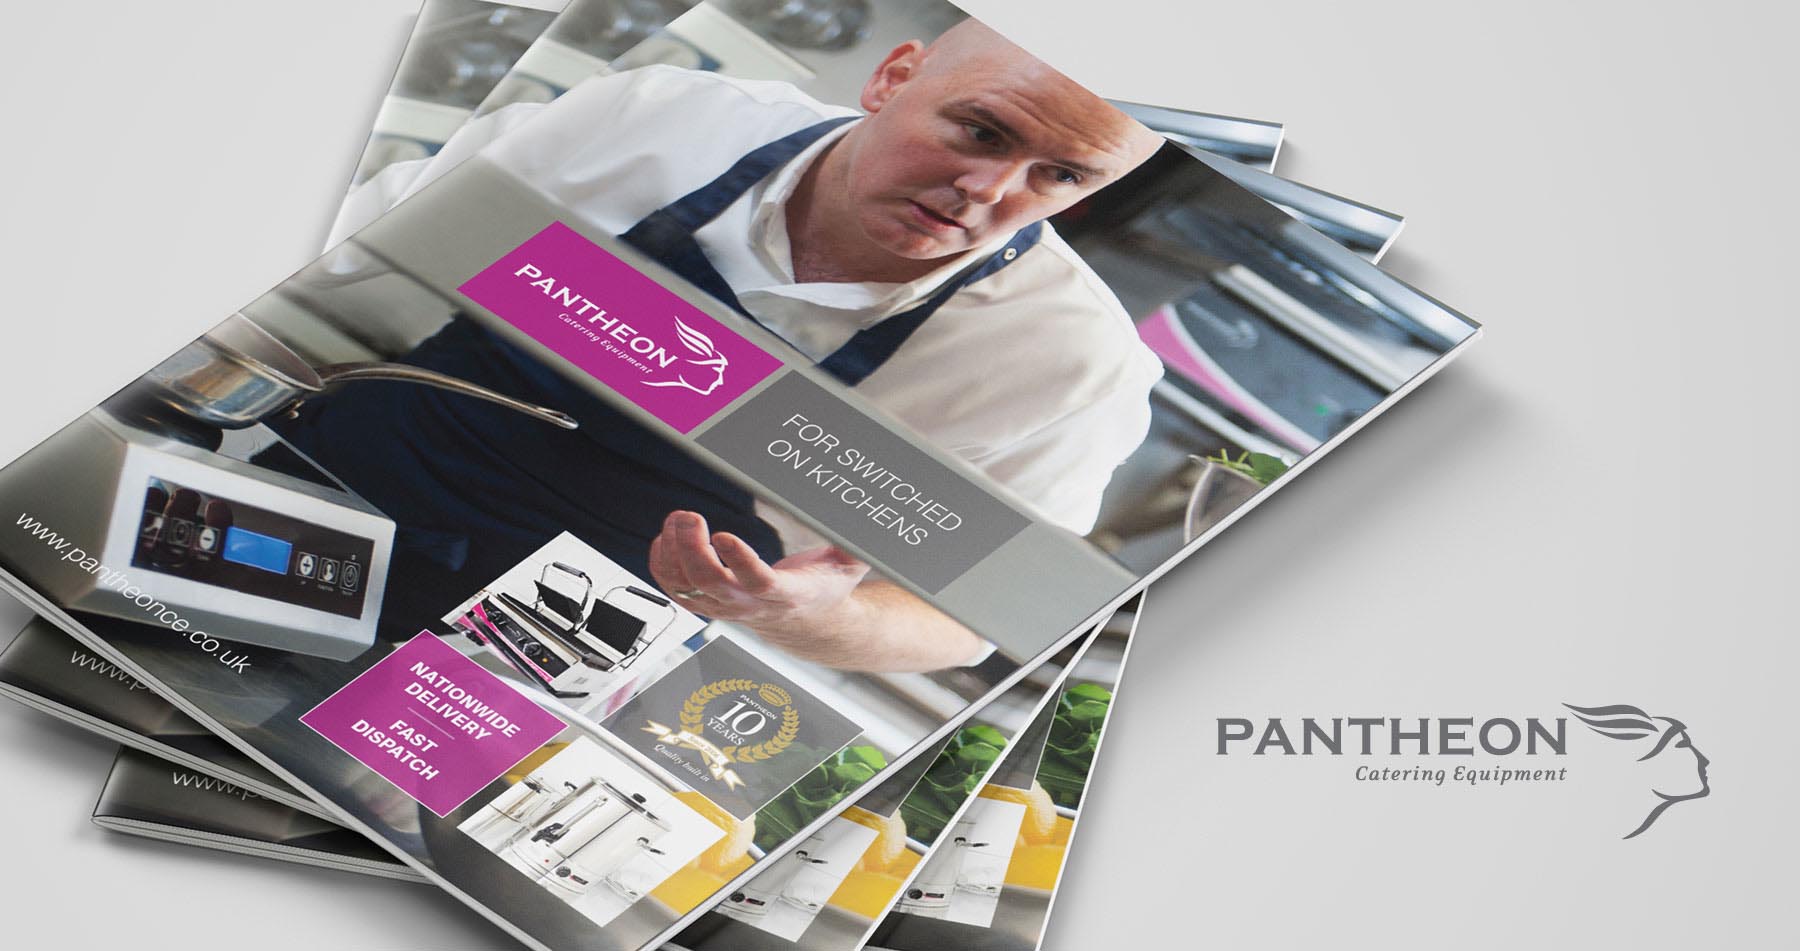 Pantheon Catering Equipment